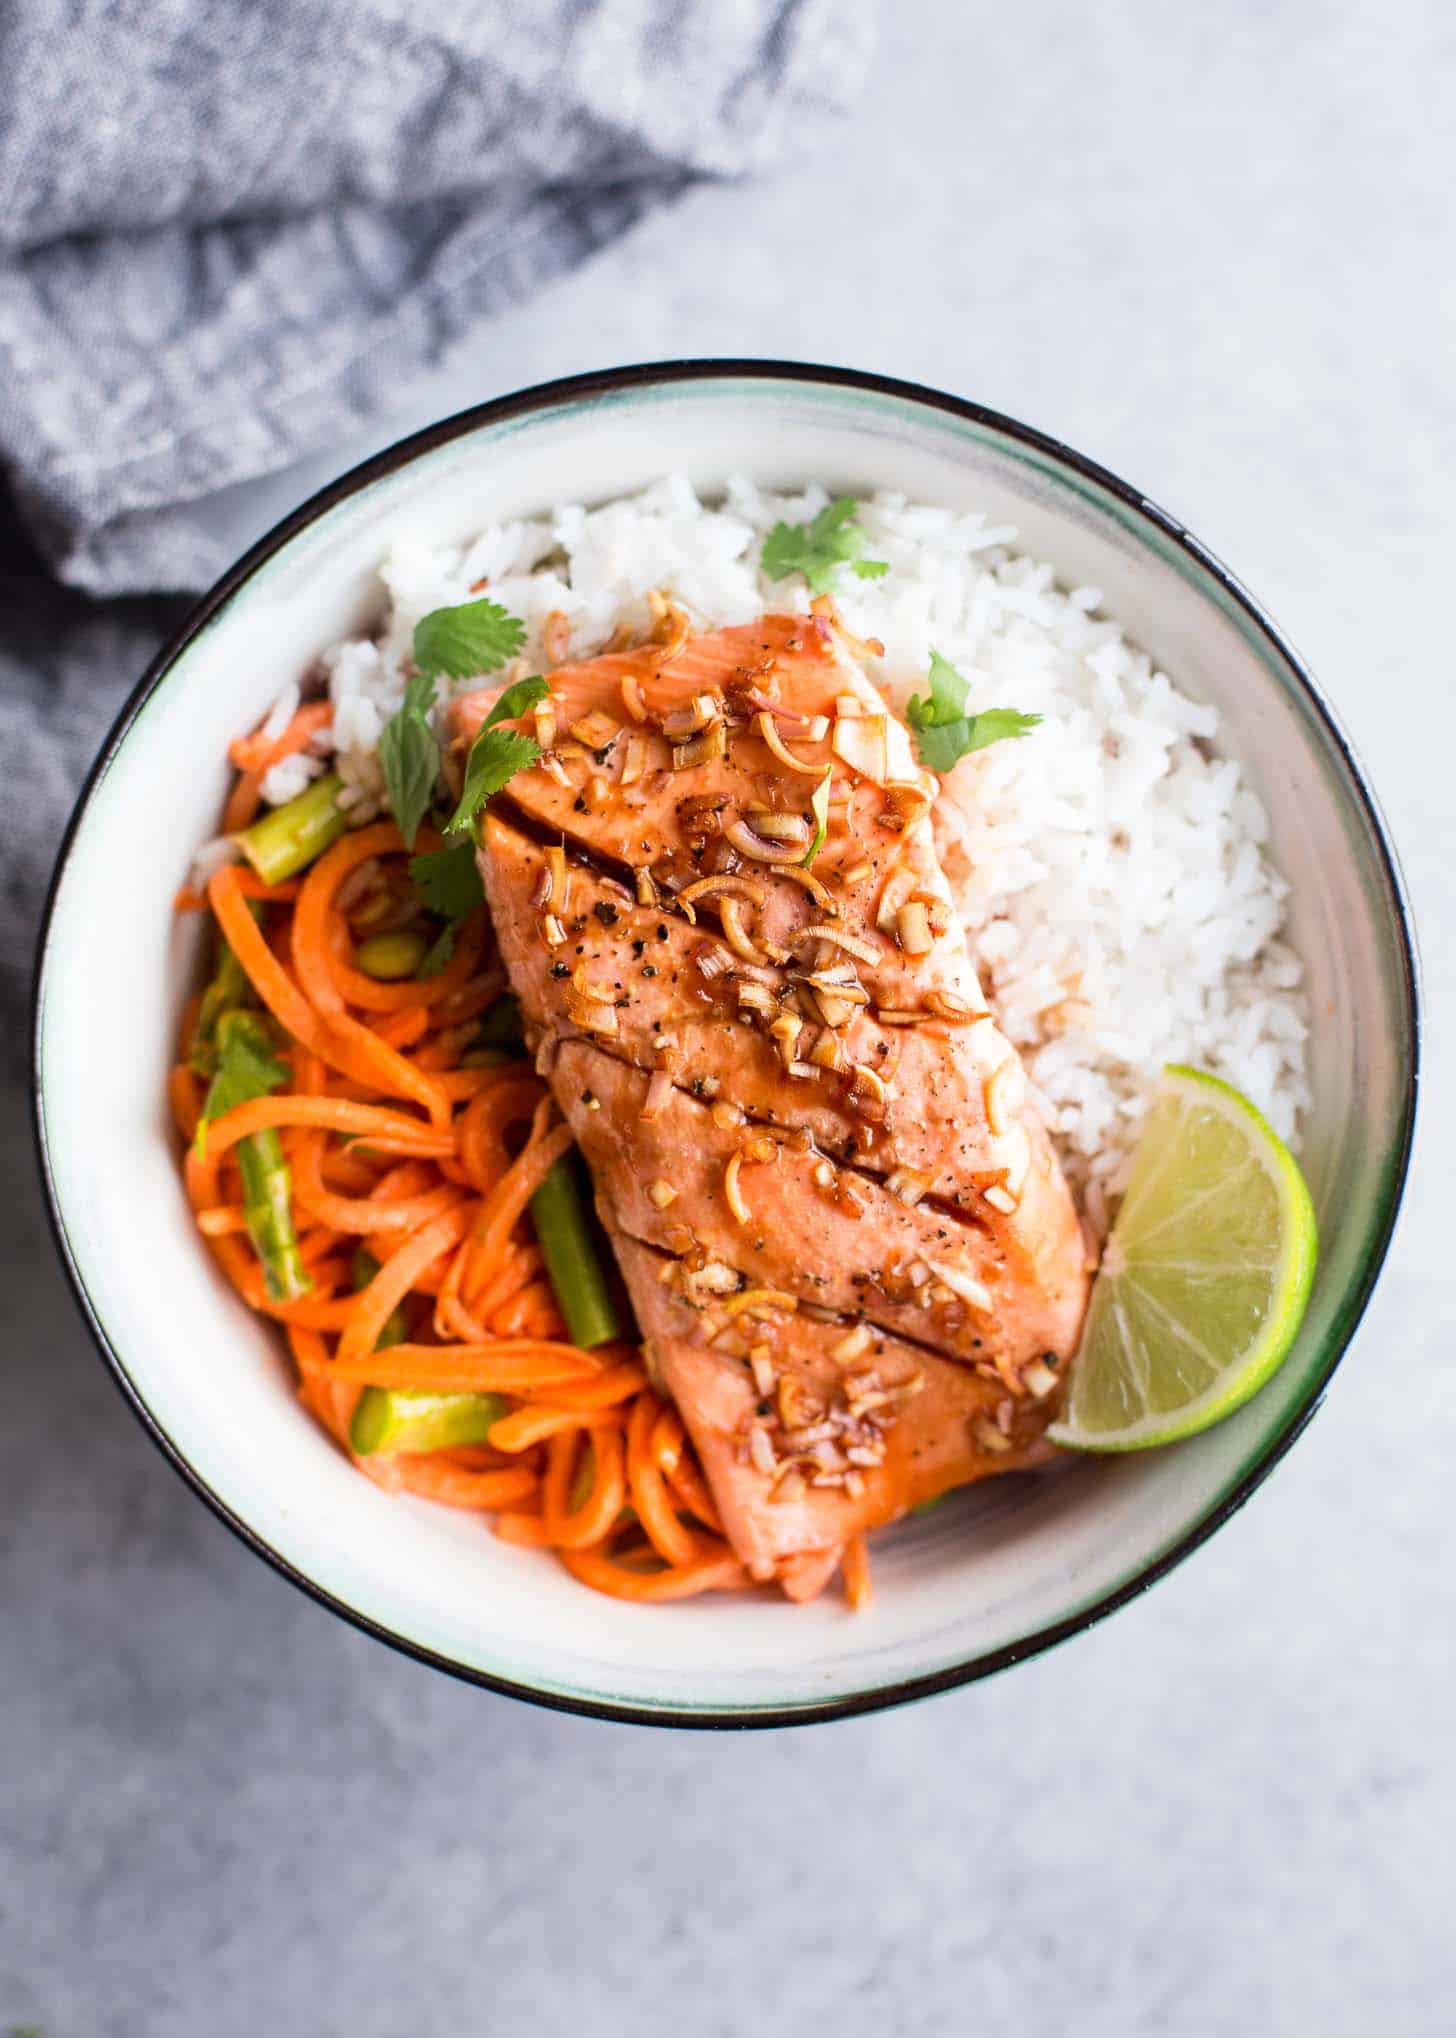 Salmon over rice in a white bowl